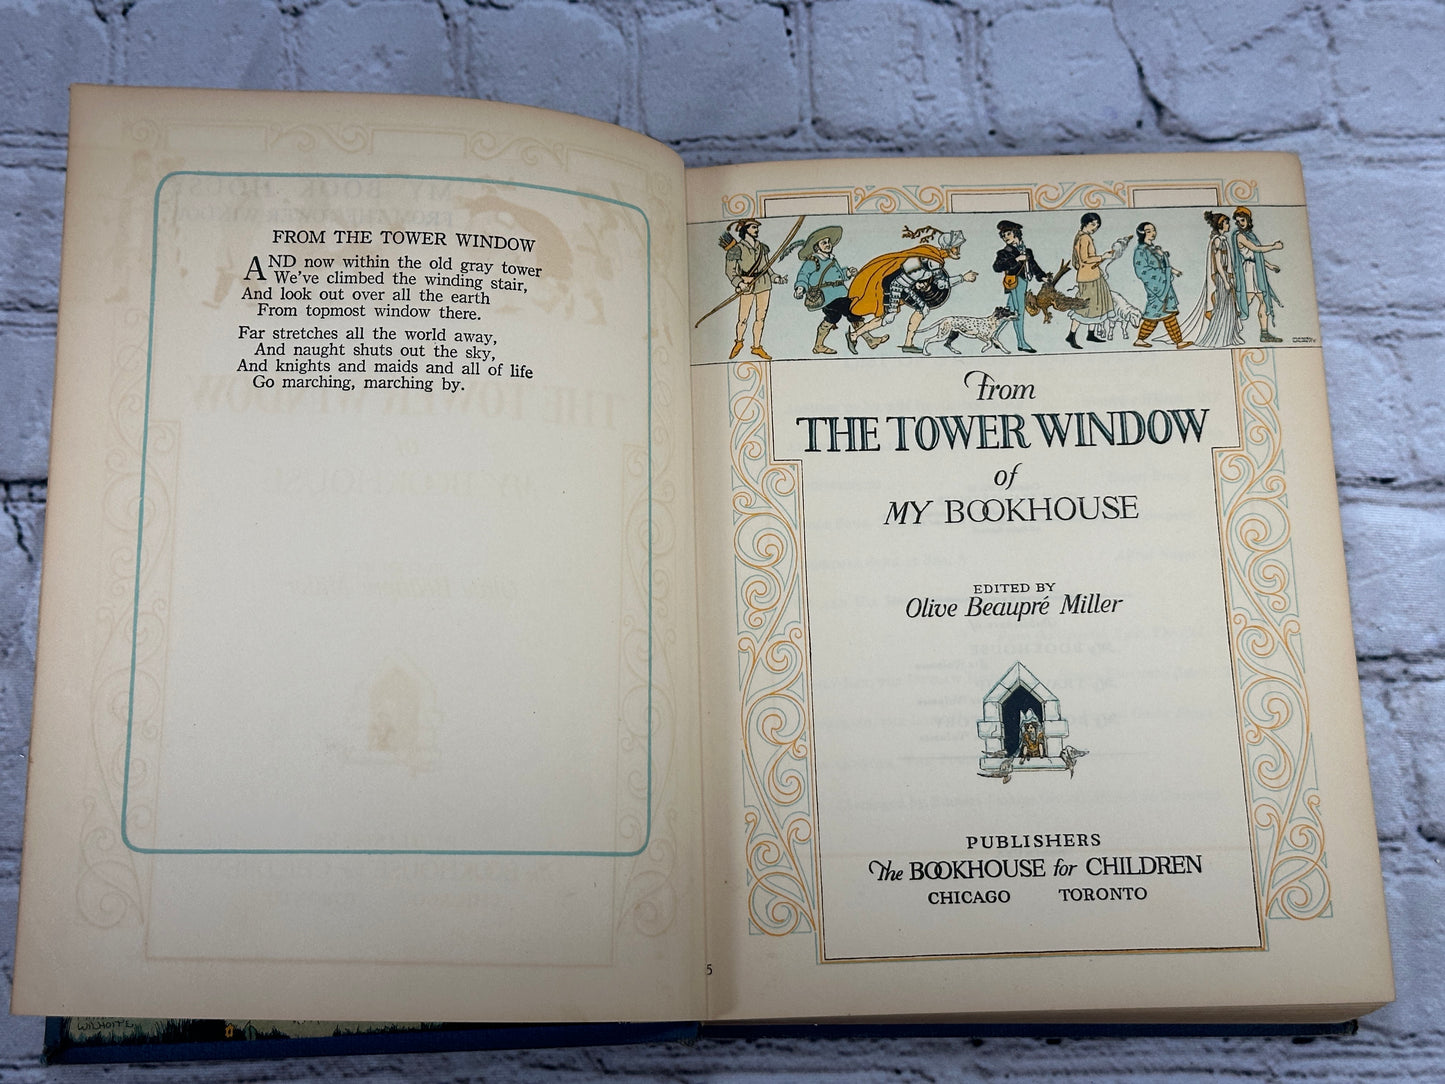 From the Tower Window of My Bookhouse edited by Olive Beaupre Miller [1921]